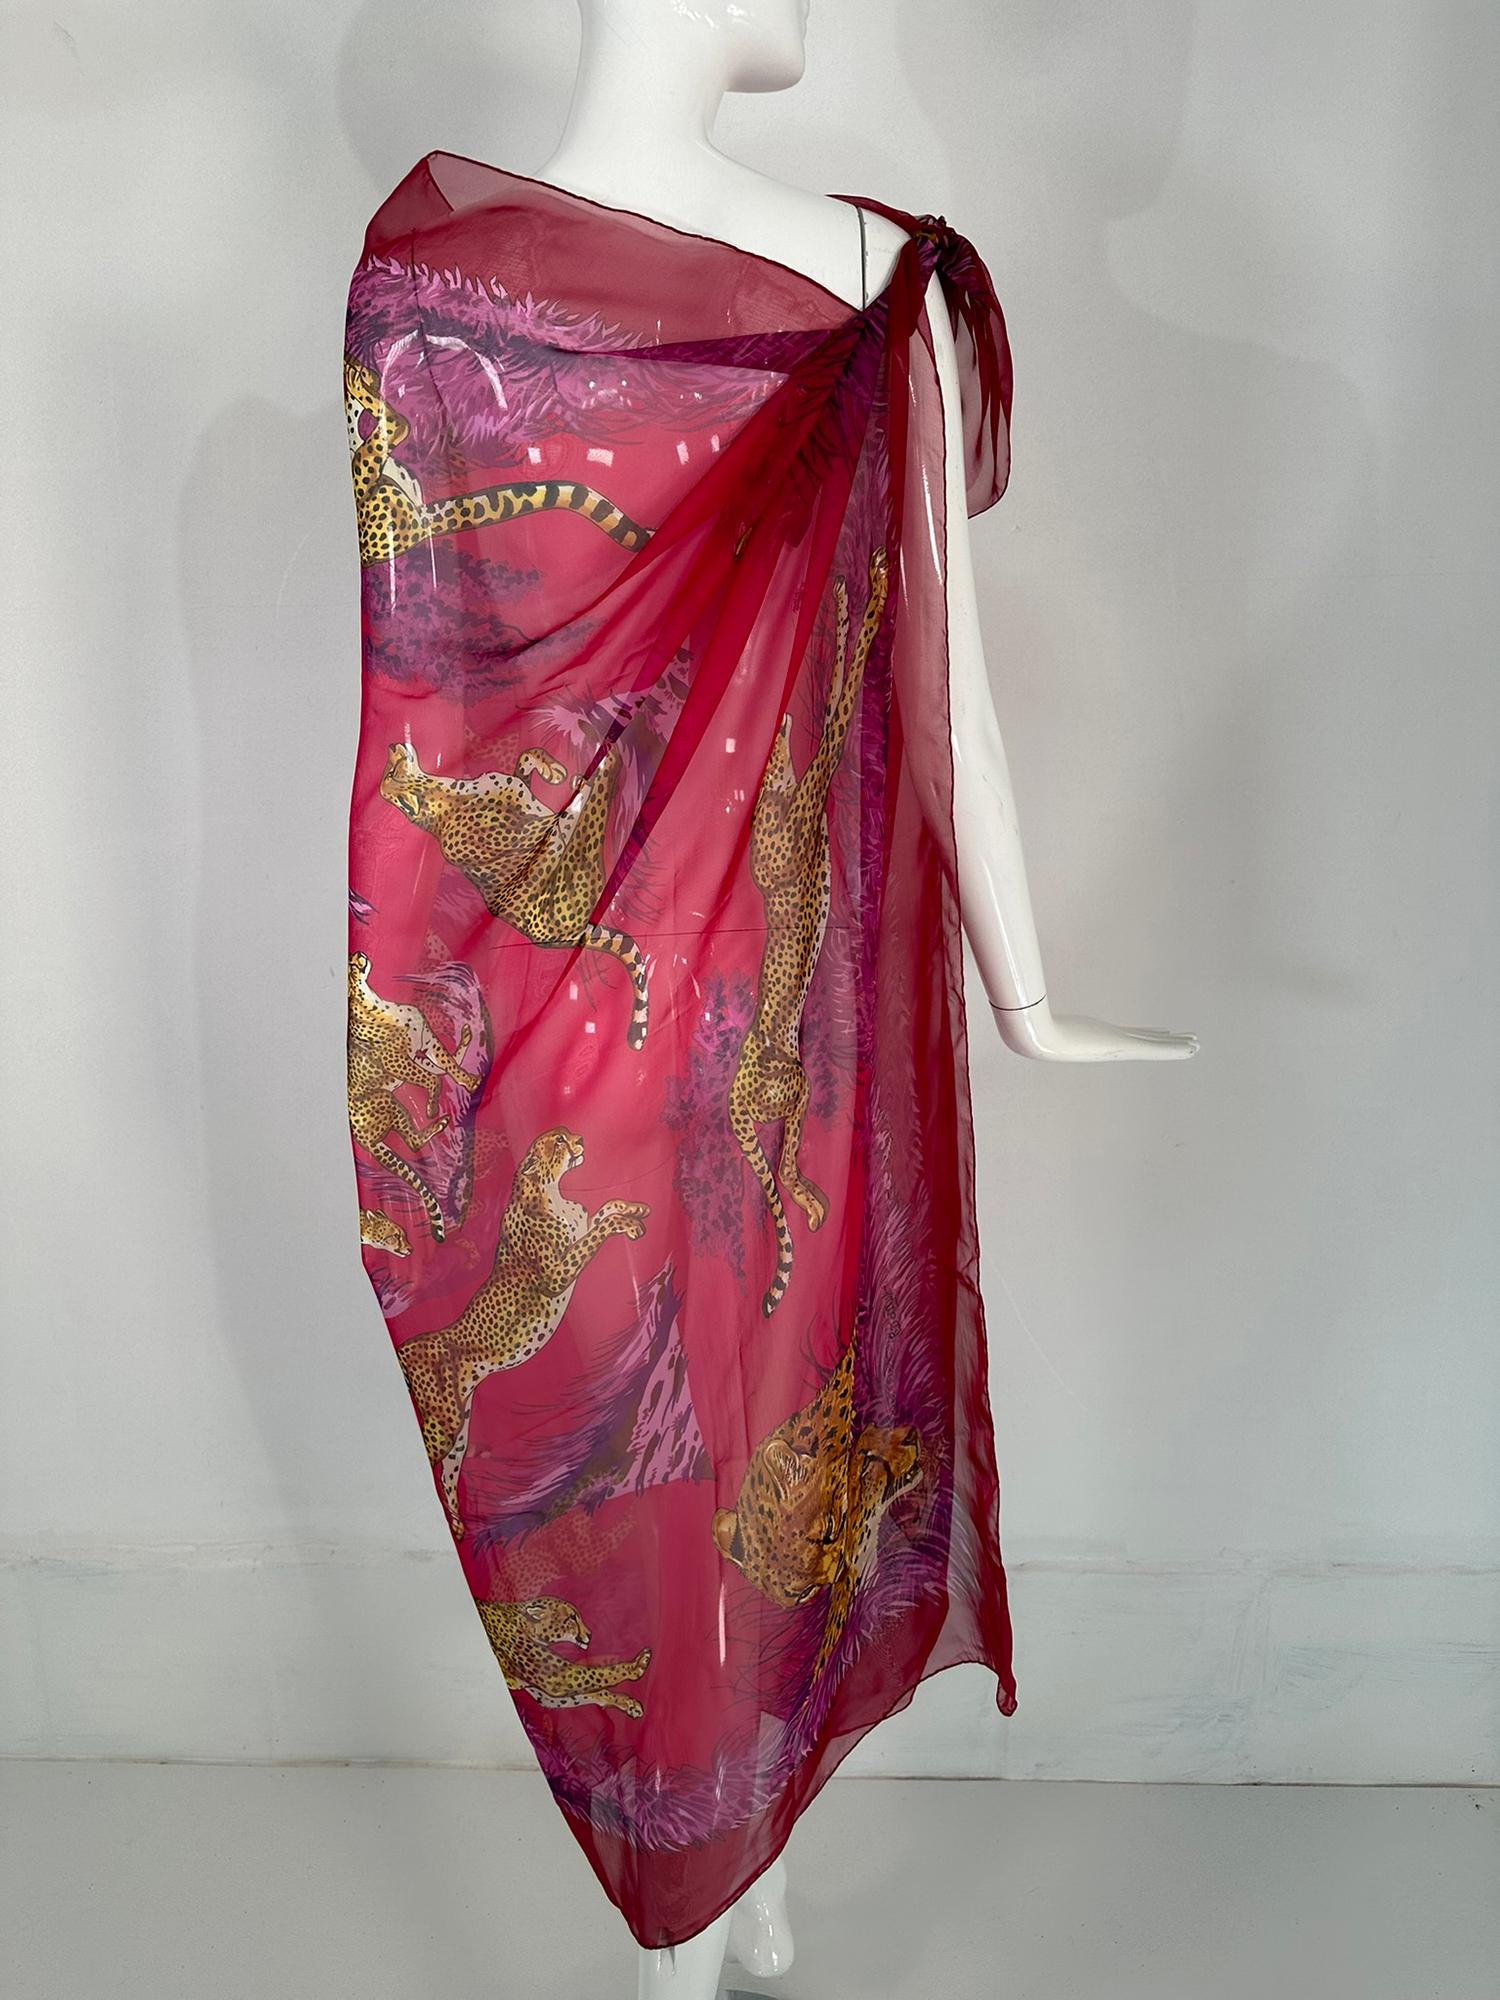 Hermes Guepards GM Silk Mousseline Chiffon Shawl  Designed by Robert Dallet 2007 For Sale 3